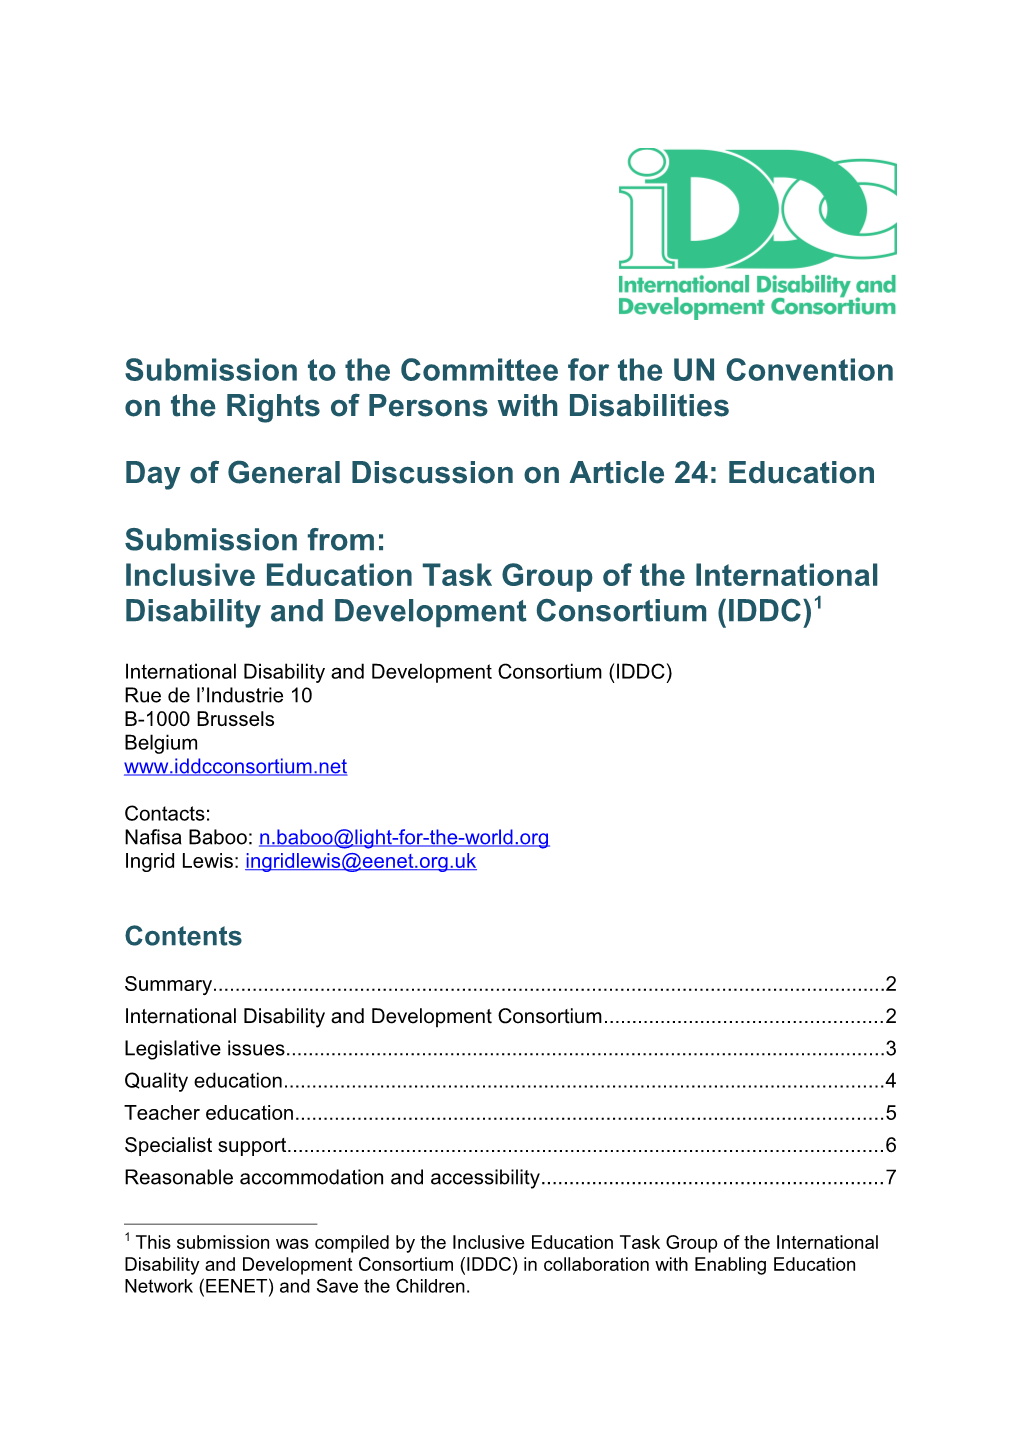 Submission to the Committee for the UN Convention on the Rights of Persons with Disabilities